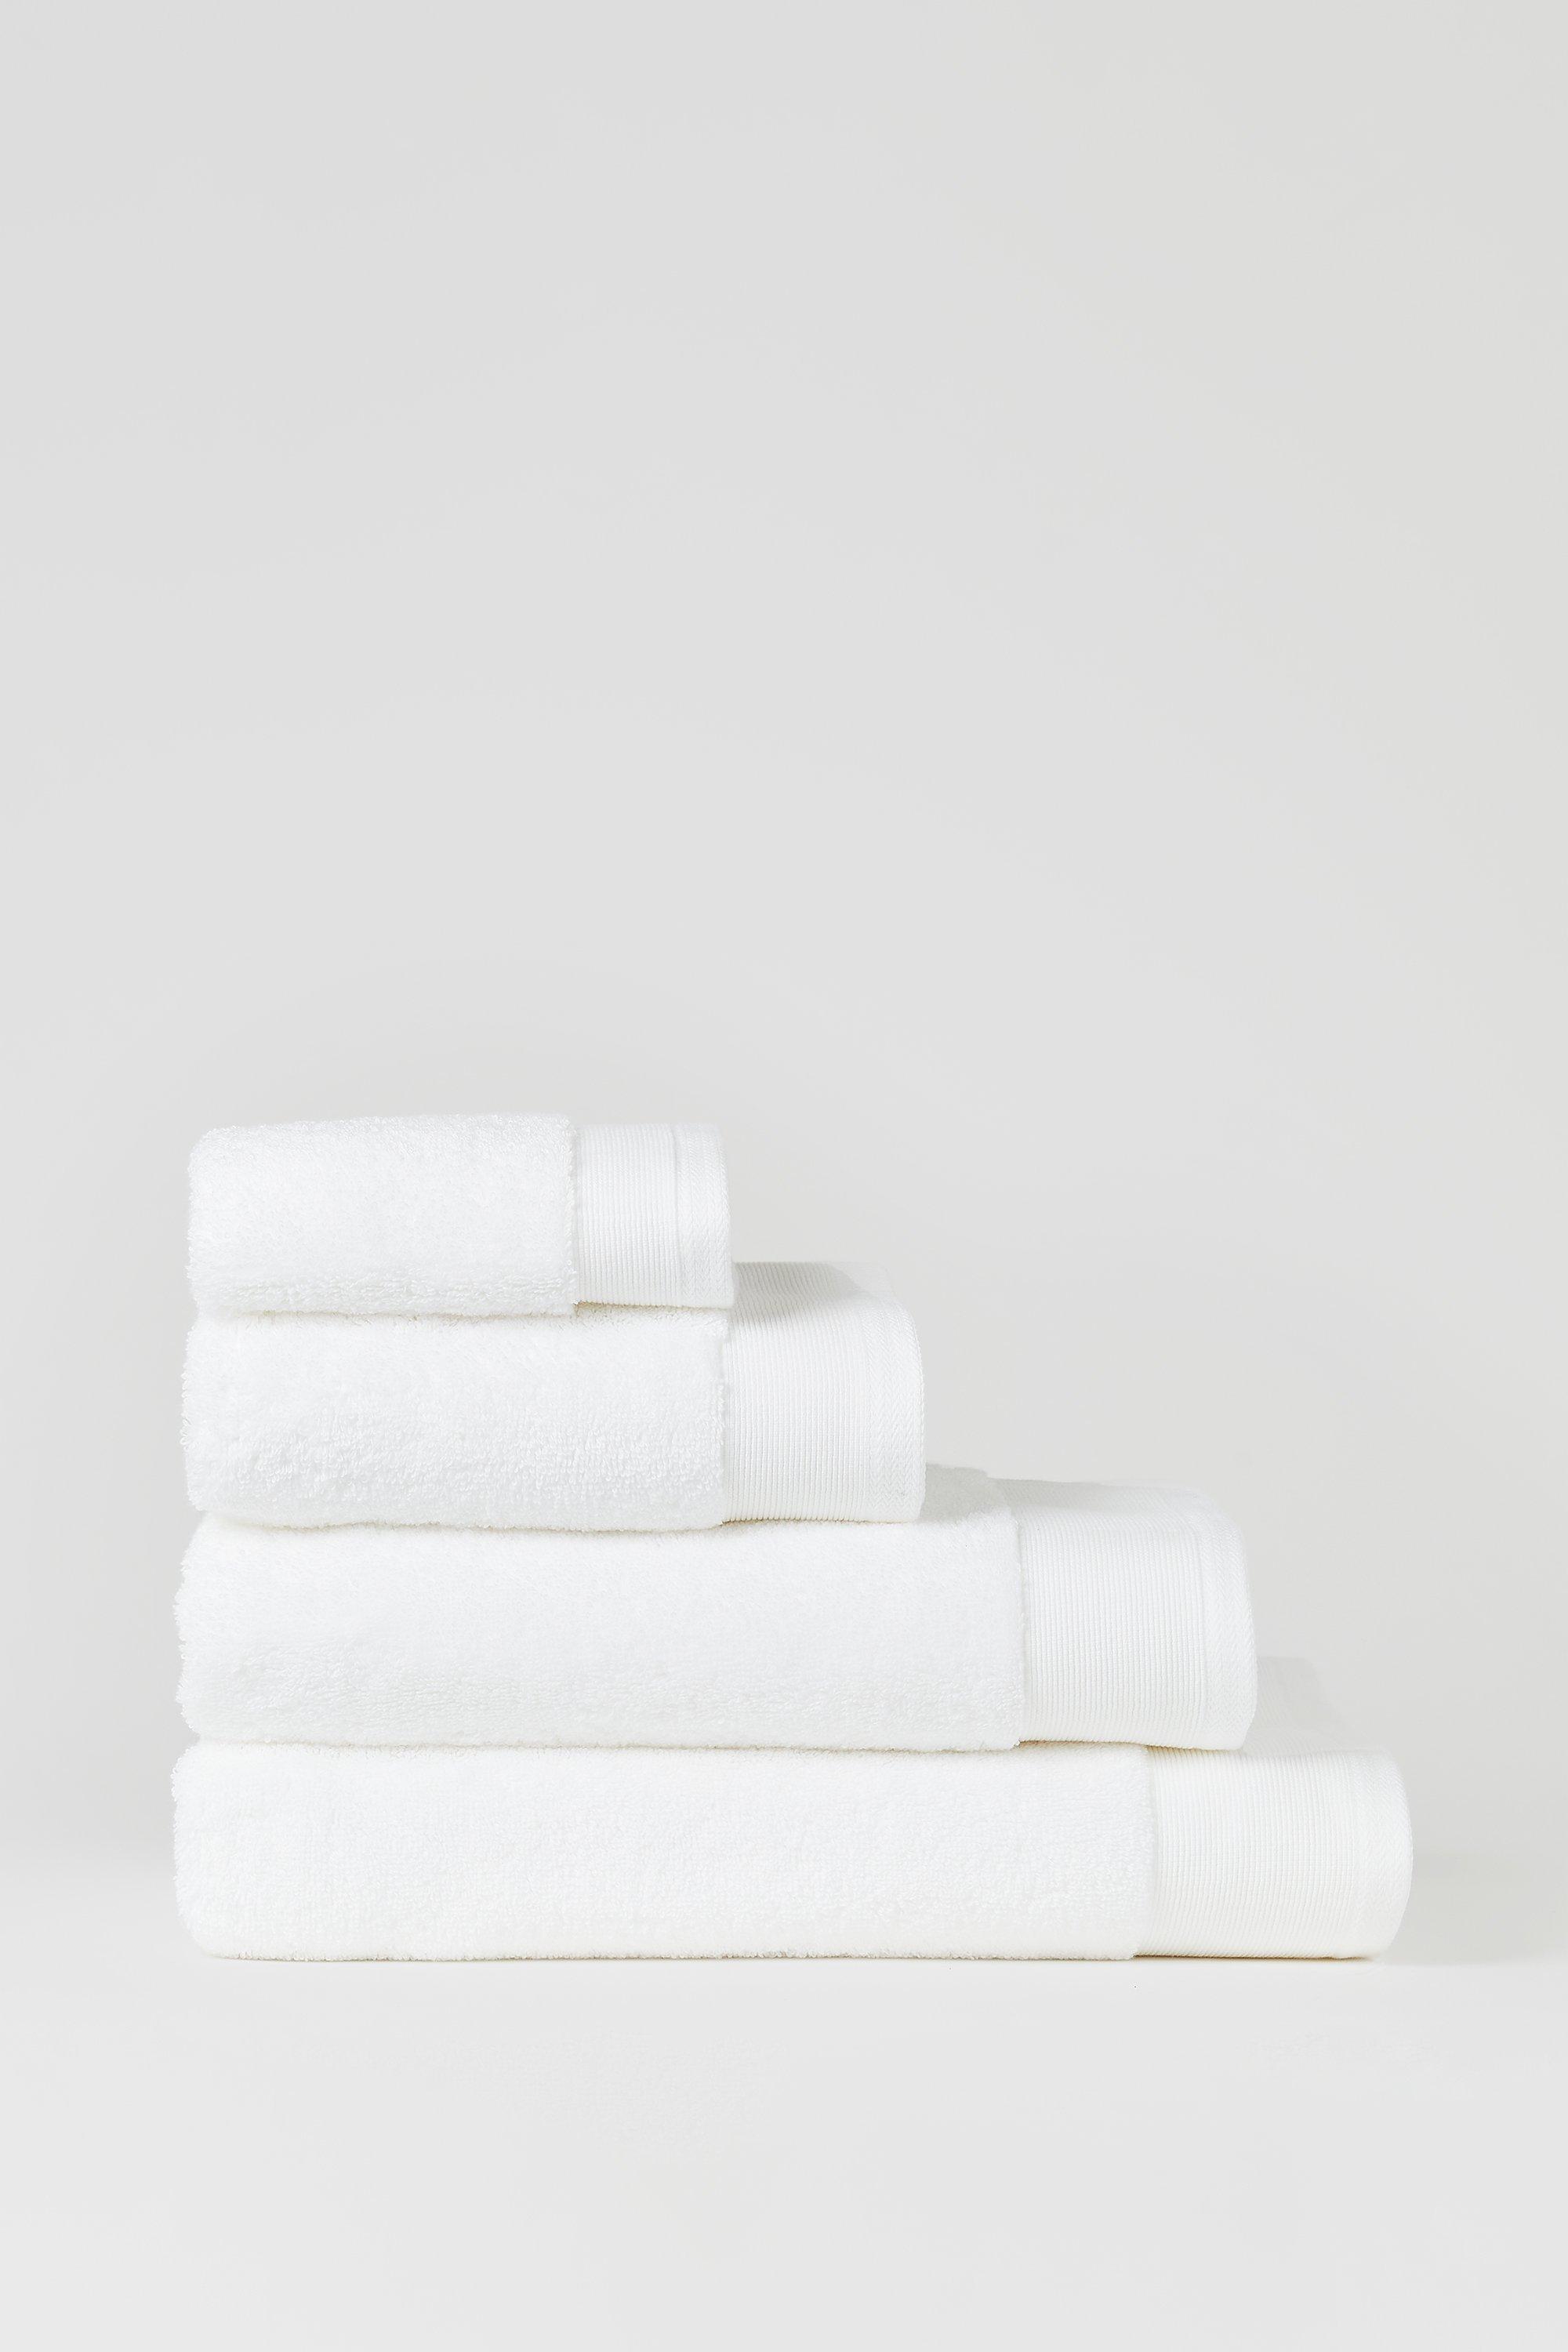 Picture of Egyptian Cotton Bath Towel